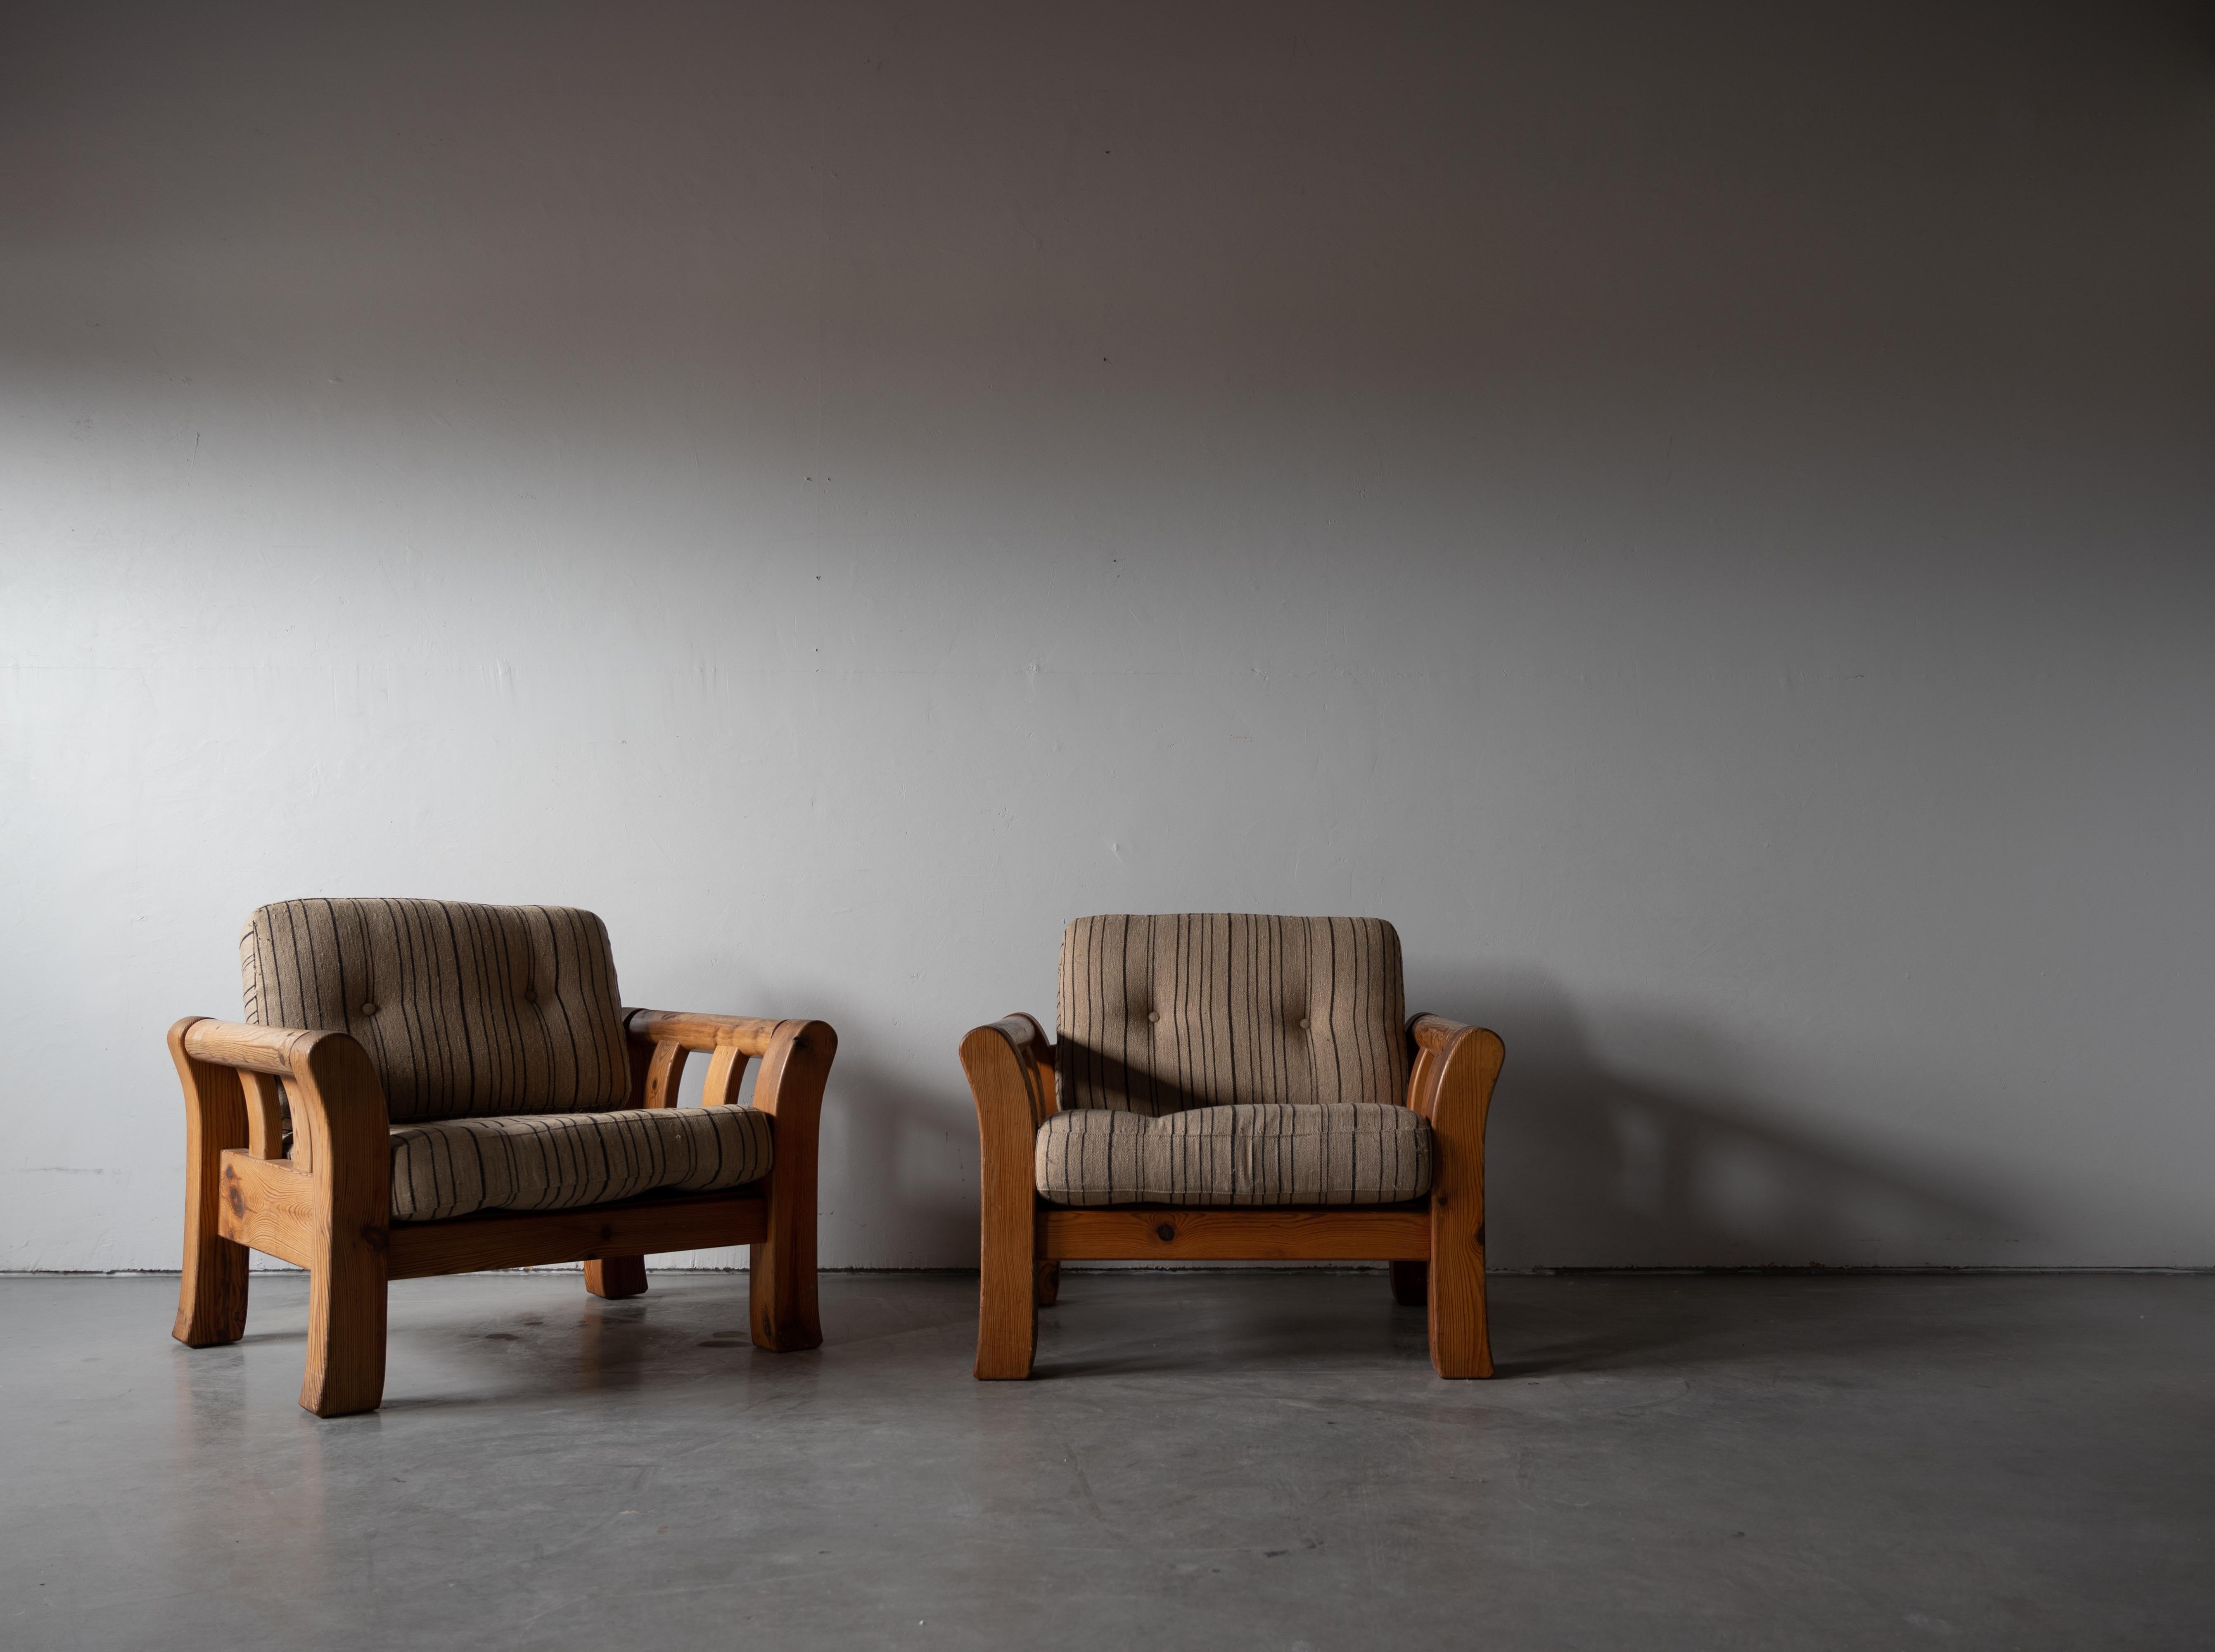 Danish Designer, Modernist Lounge Chairs, Solid Pine, Fabric, Denmark, 1970s For Sale 7